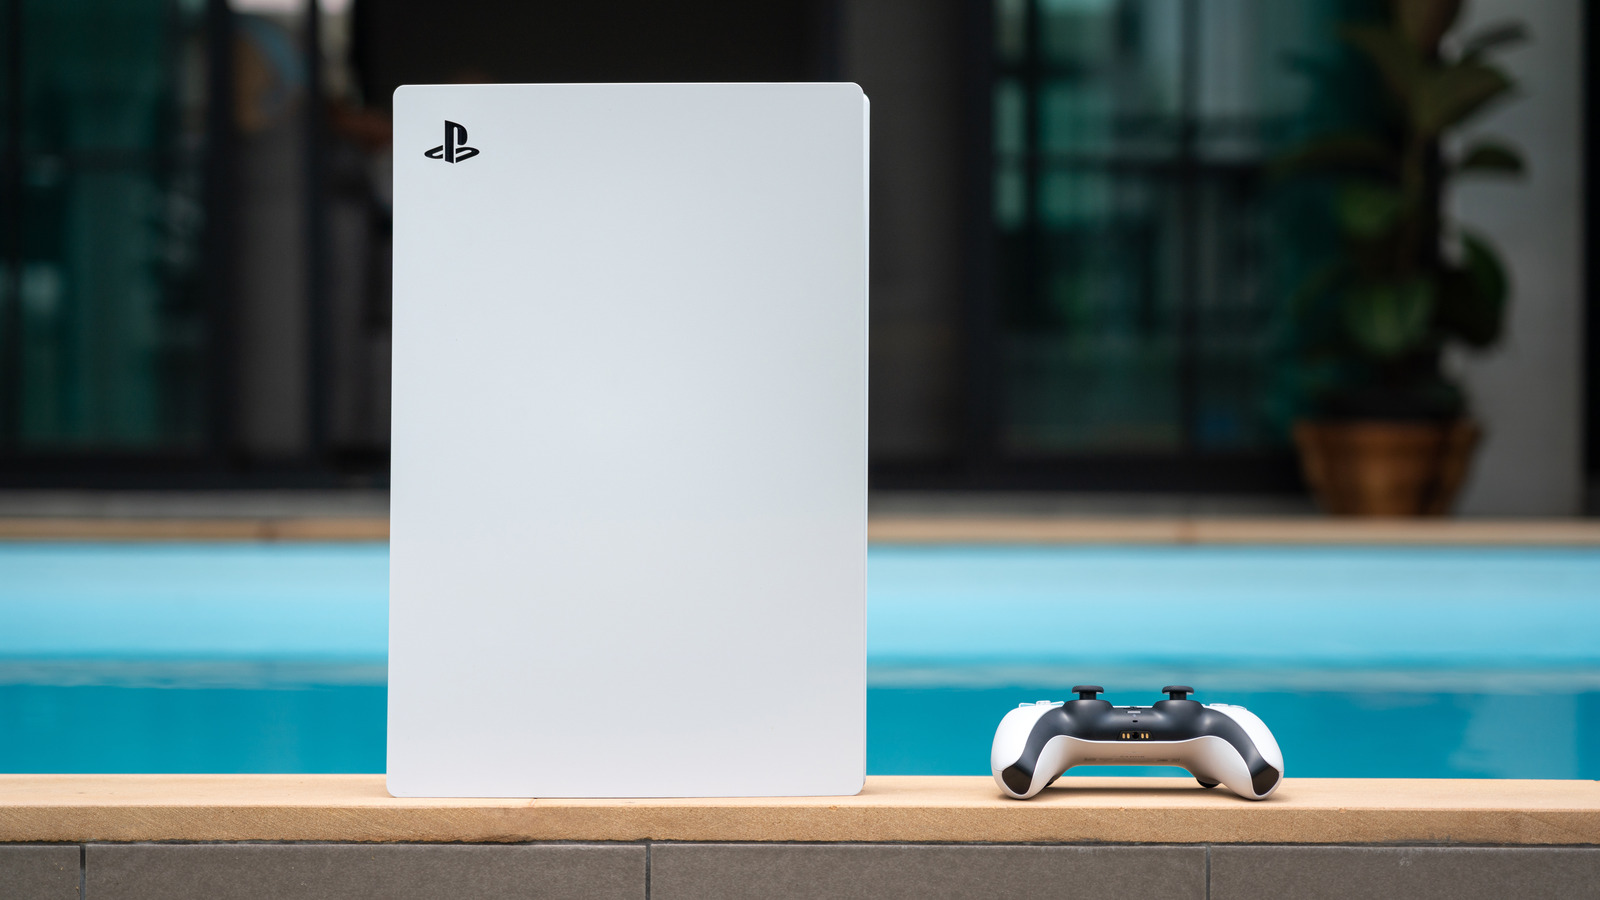 PlayStation 5: Sony gives first look at new PS5 console and games, Science  & Tech News